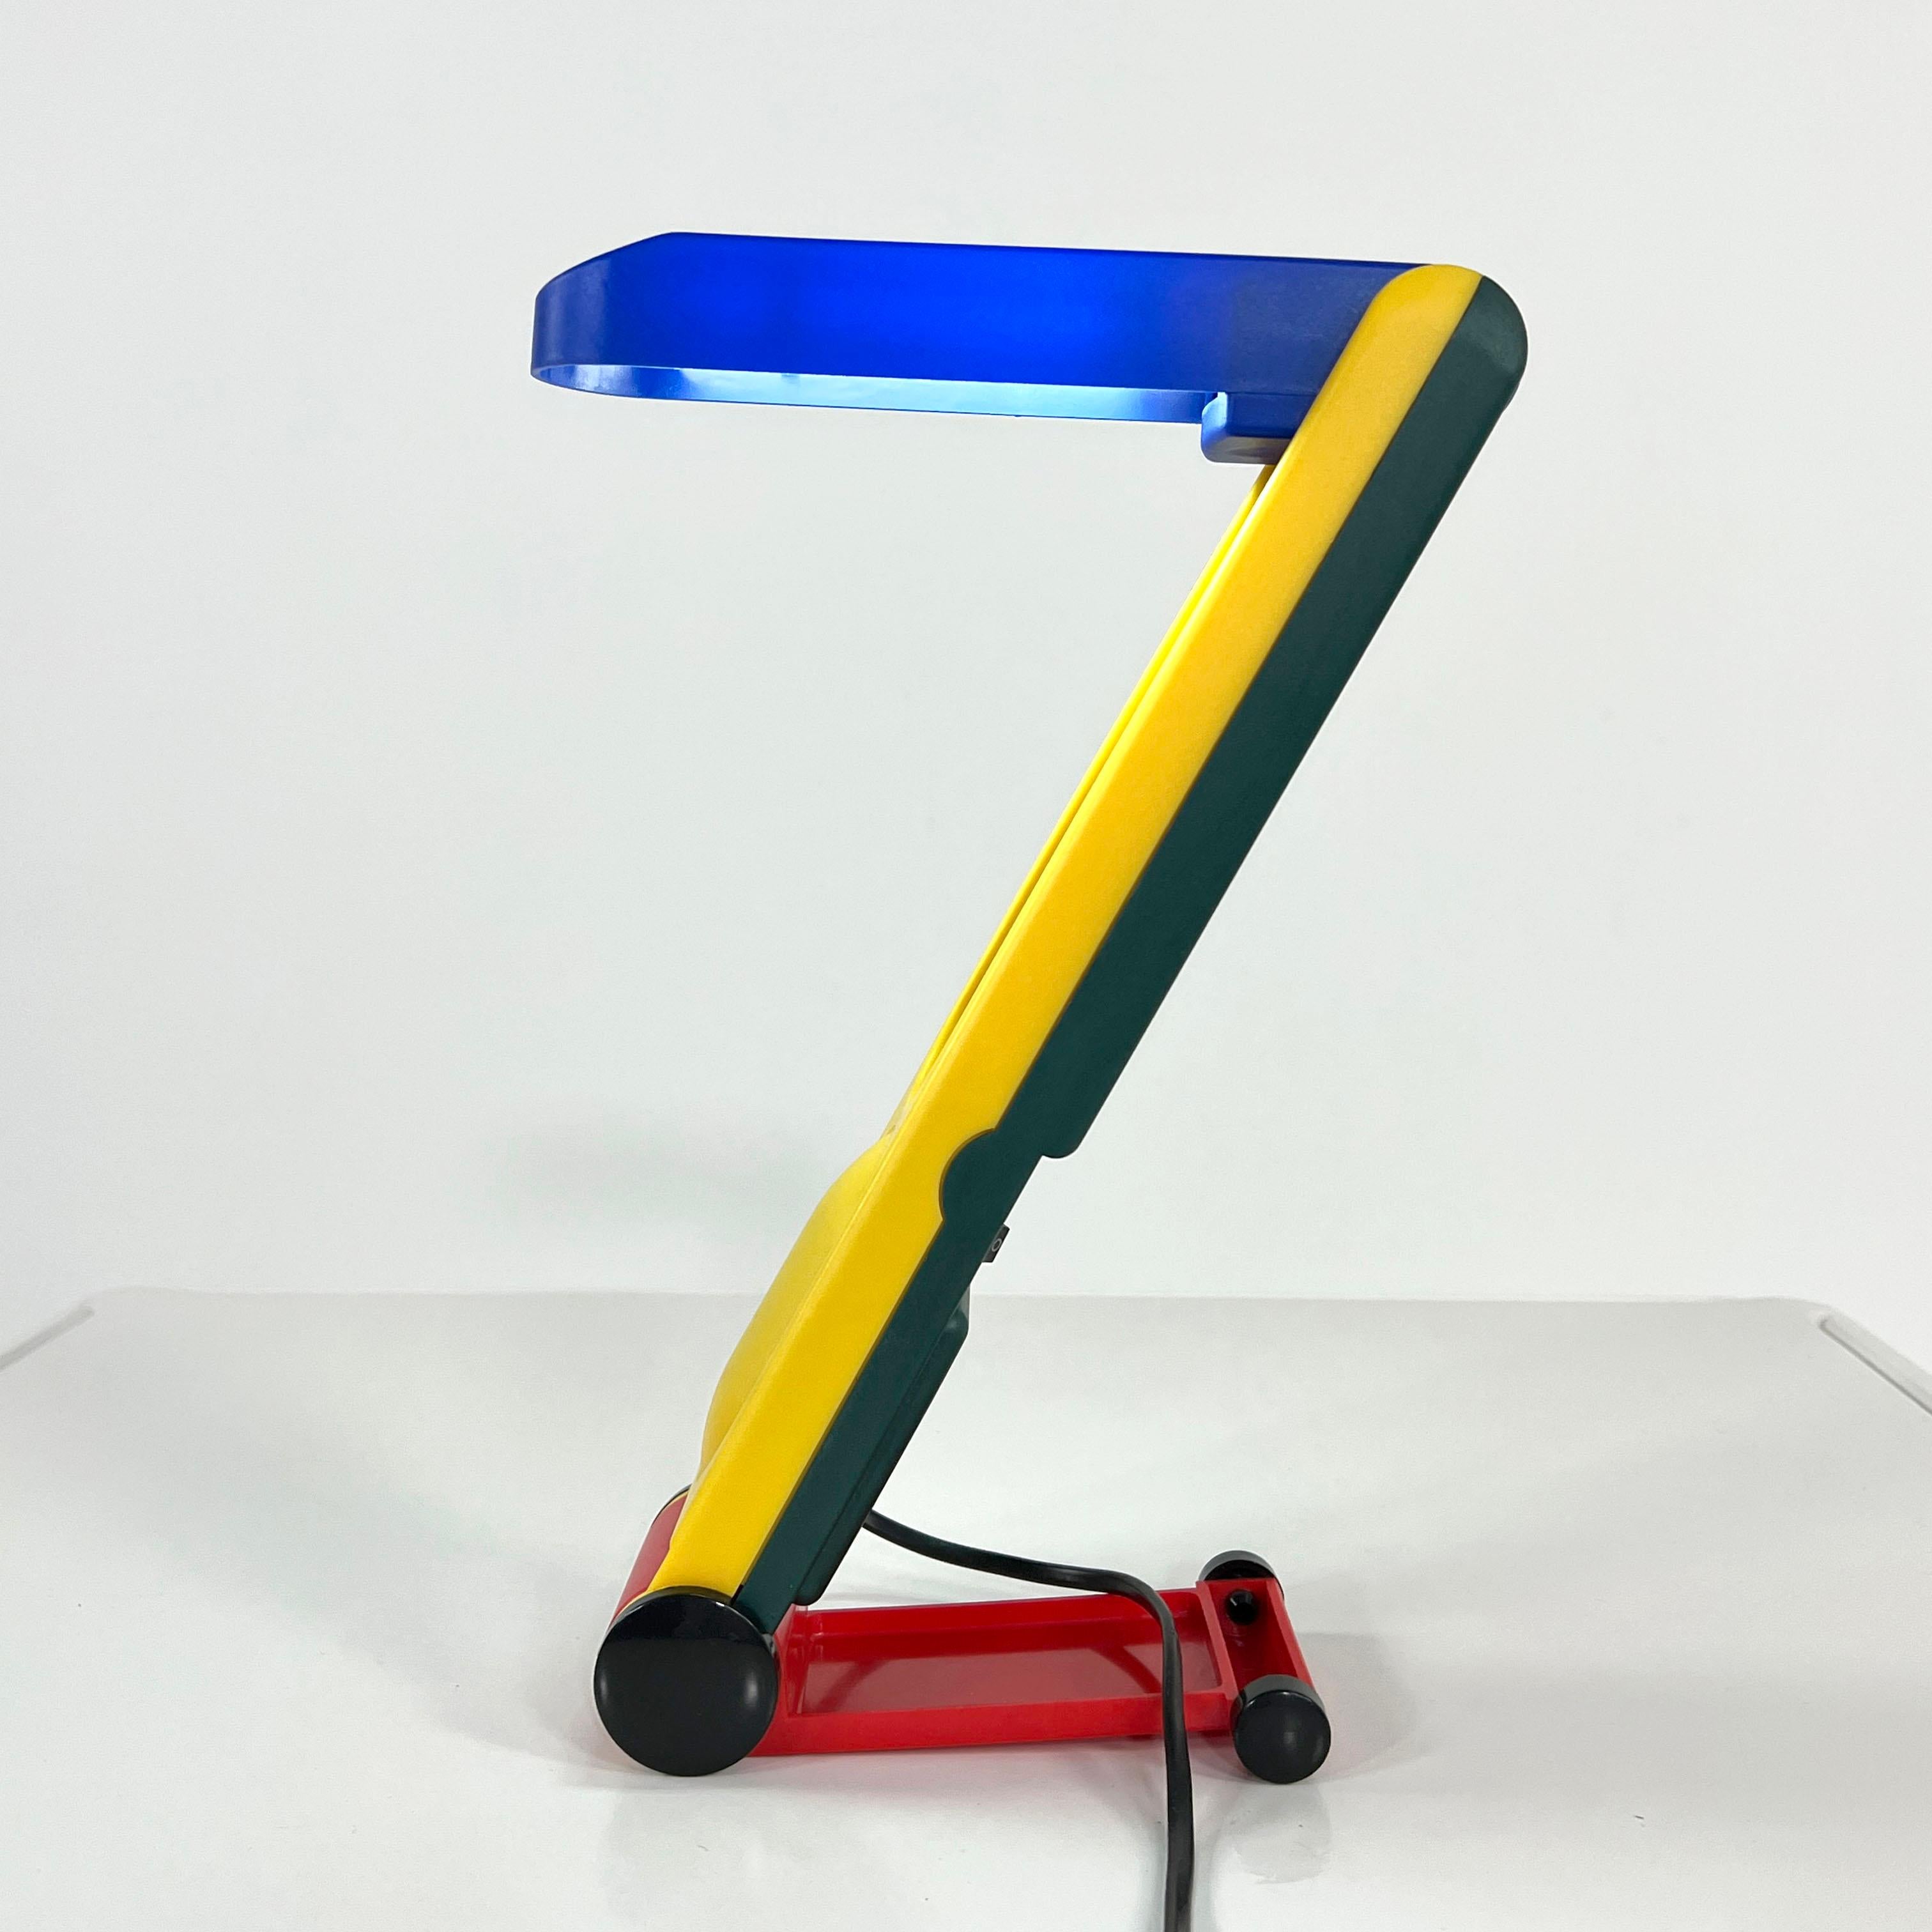 Multicolor Folding Table Lamp from Benetton Italy, 1980s
Producer - Benetton Italy
Design Period - Eighties
Measurements - Width 8 cm x Depth 30 cm x Height 42 cm
Materials - Plastic
Color - Yellow, blue, red, green
Light wear consistent with